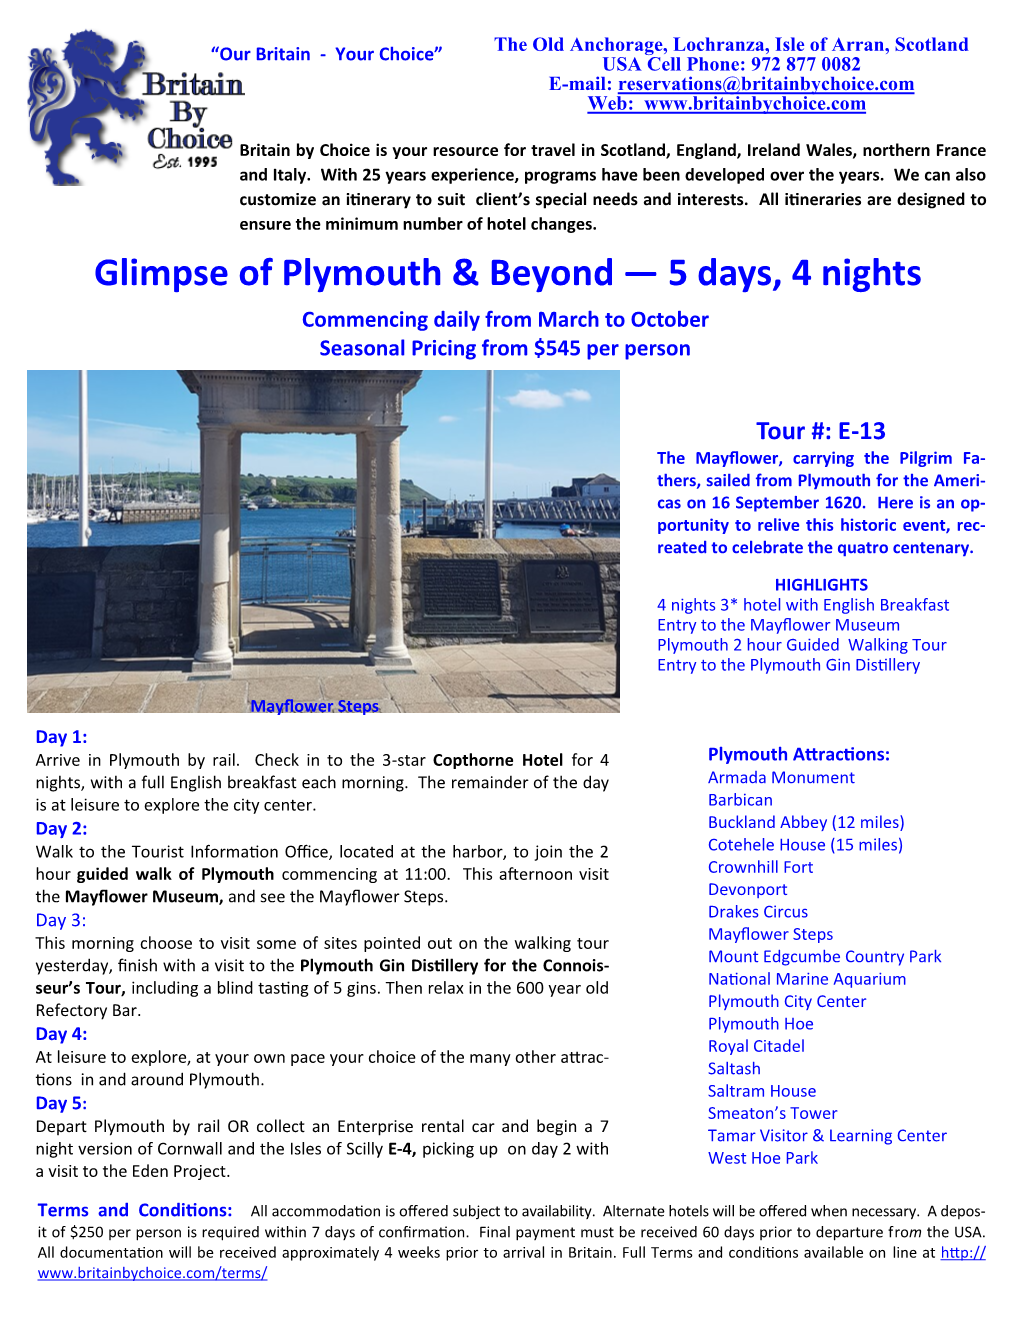 Glimpse of Plymouth & Beyond — 5 Days, 4 Nights